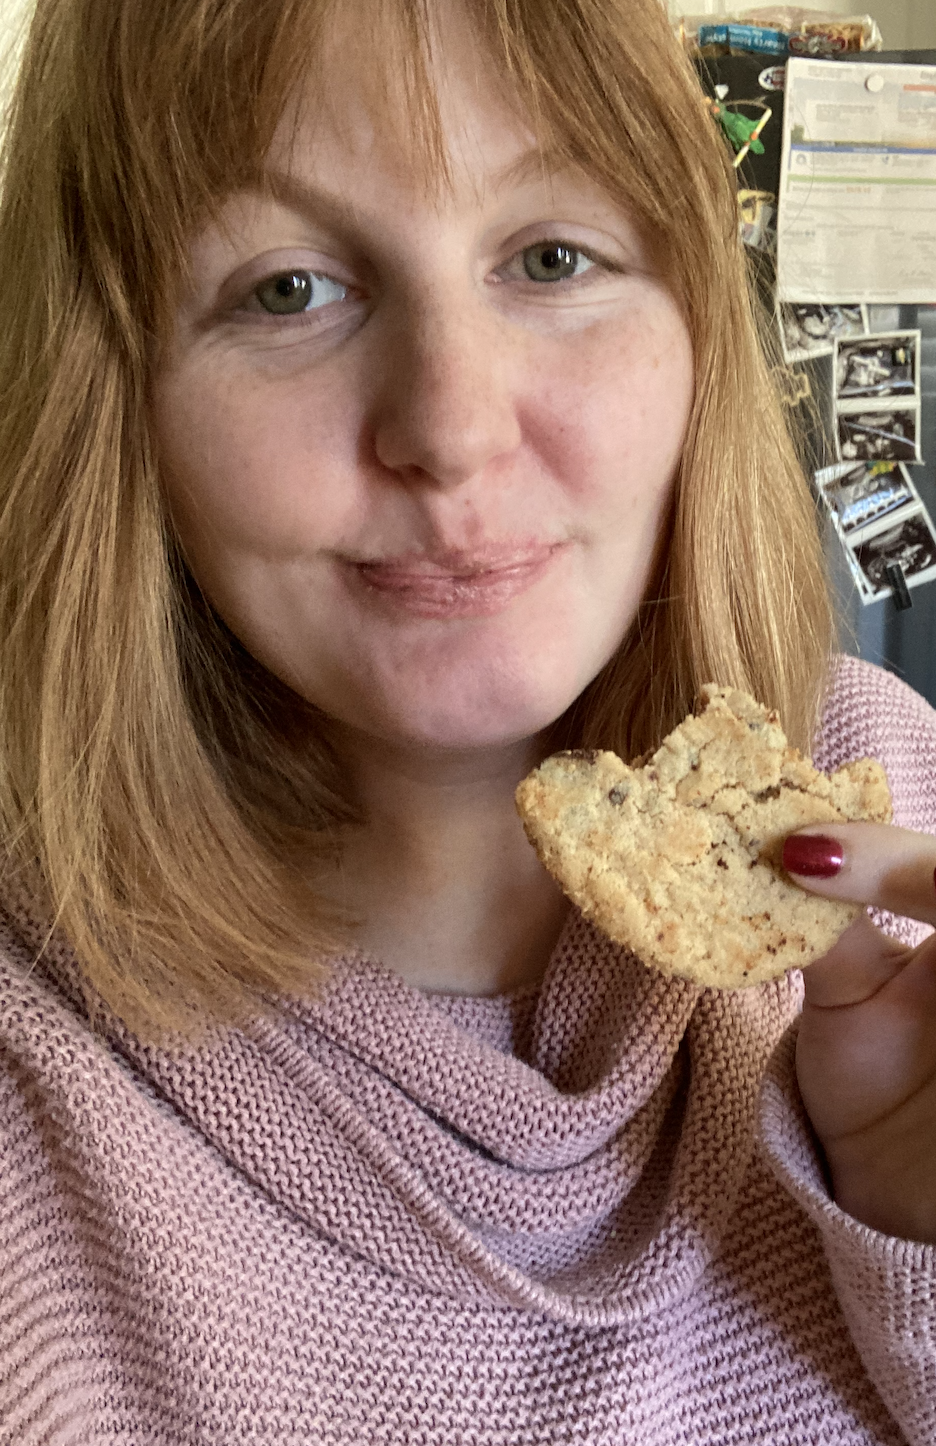 author smiling at the camera holding a cookie